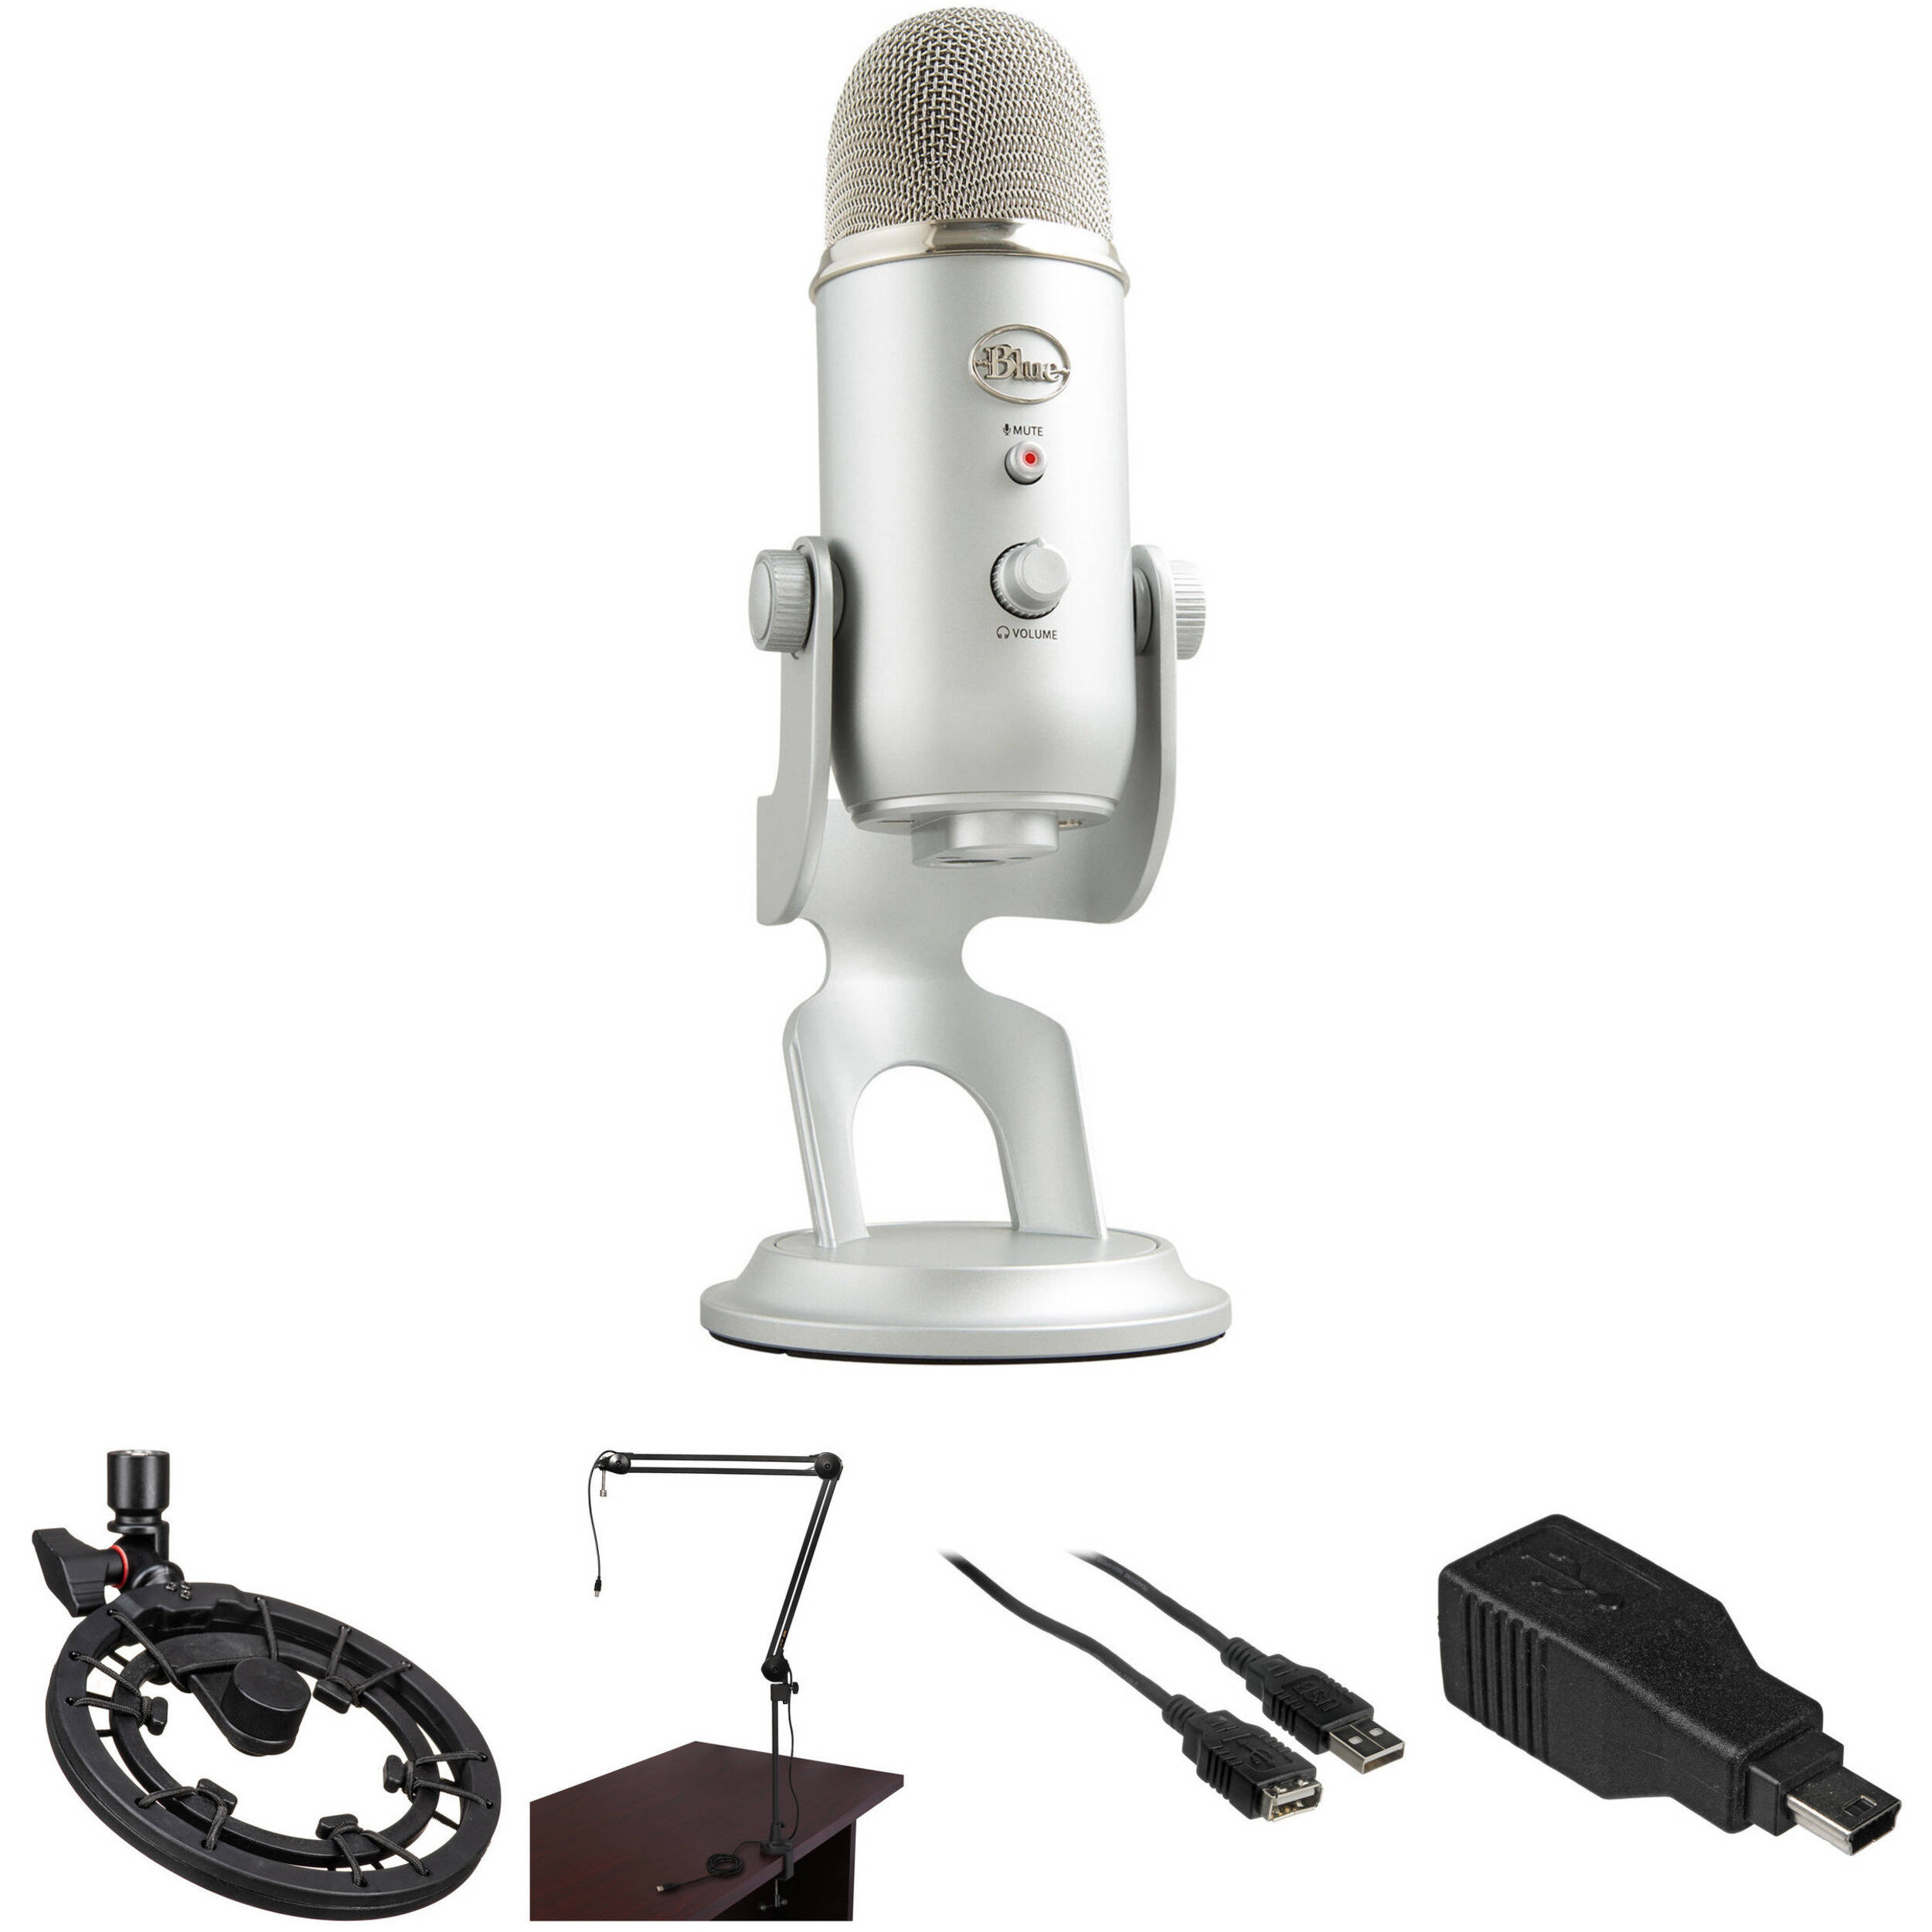 Blue Yeti Usb Condenser Microphone Broadcast Kit With